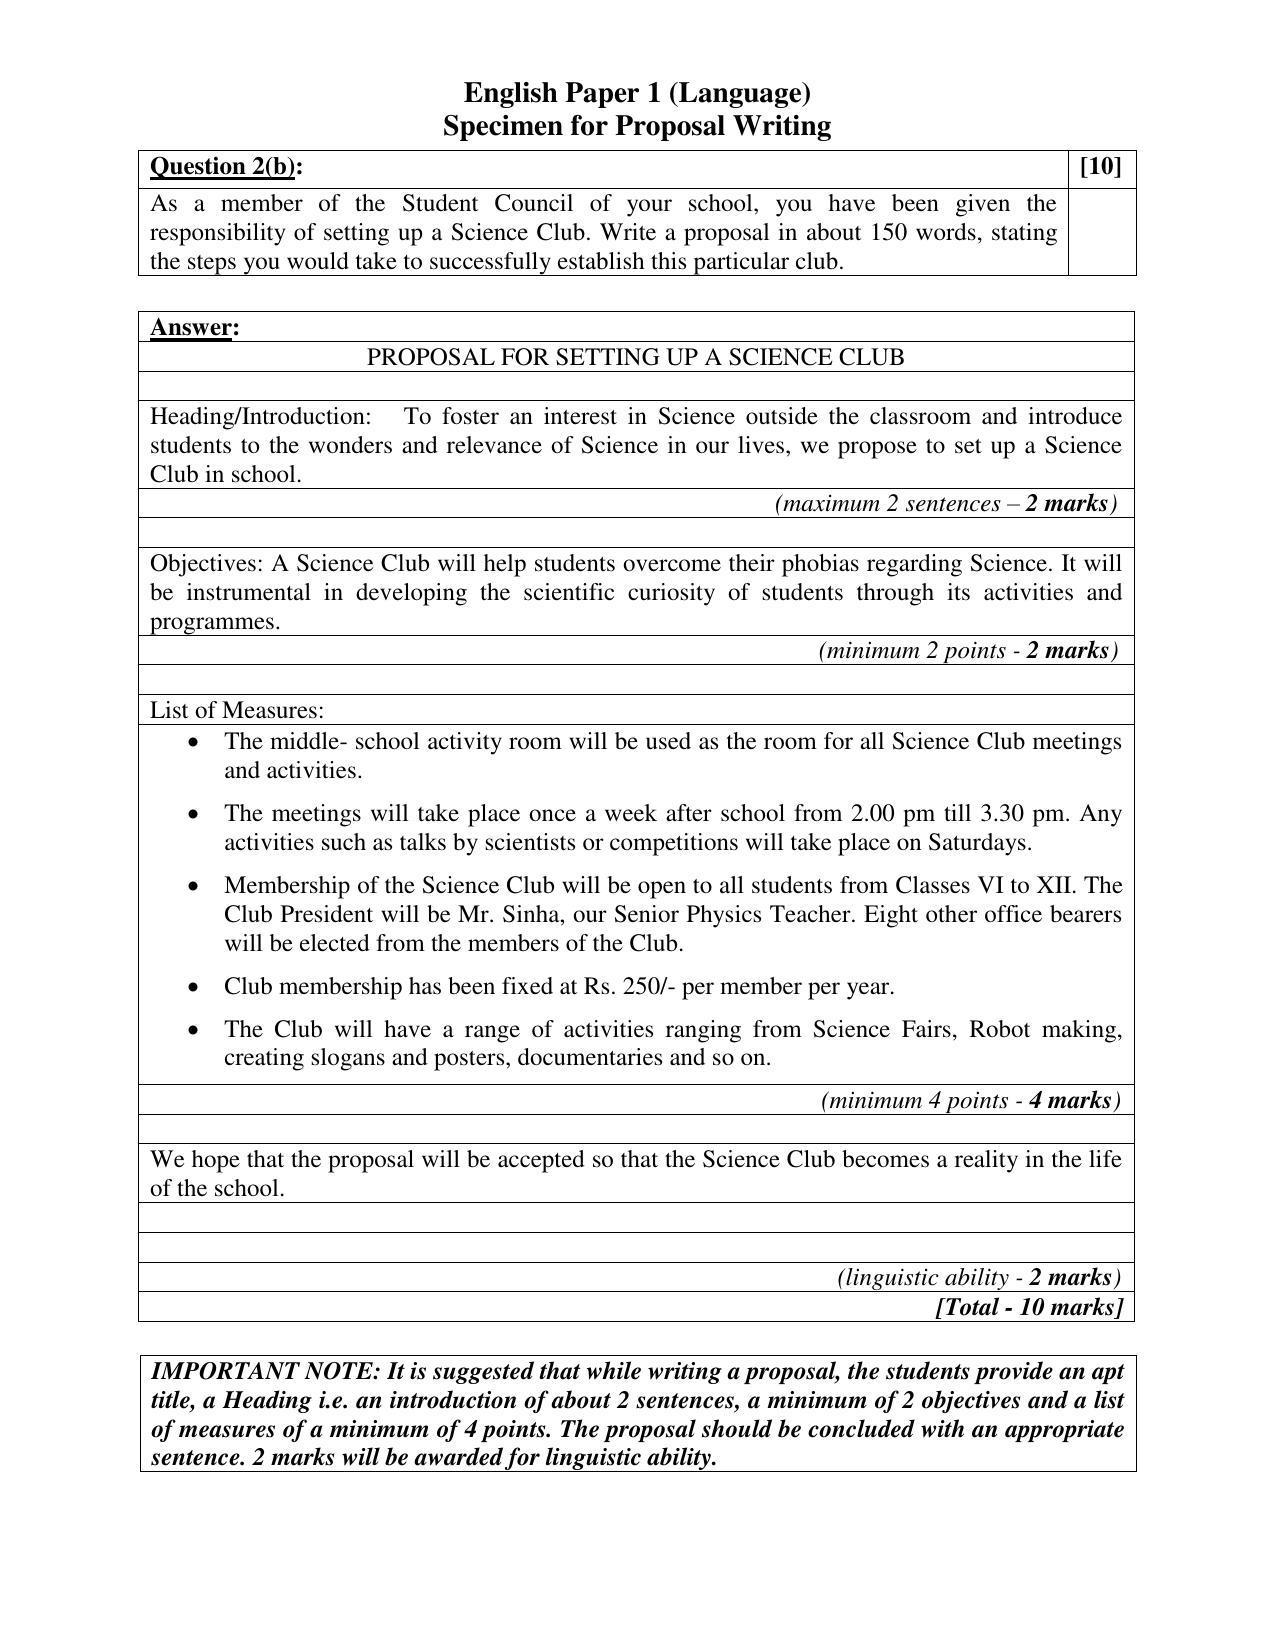 ISC Class 12 English Paper 1 (Language) - Specimen for Proposal Writing - Page 1